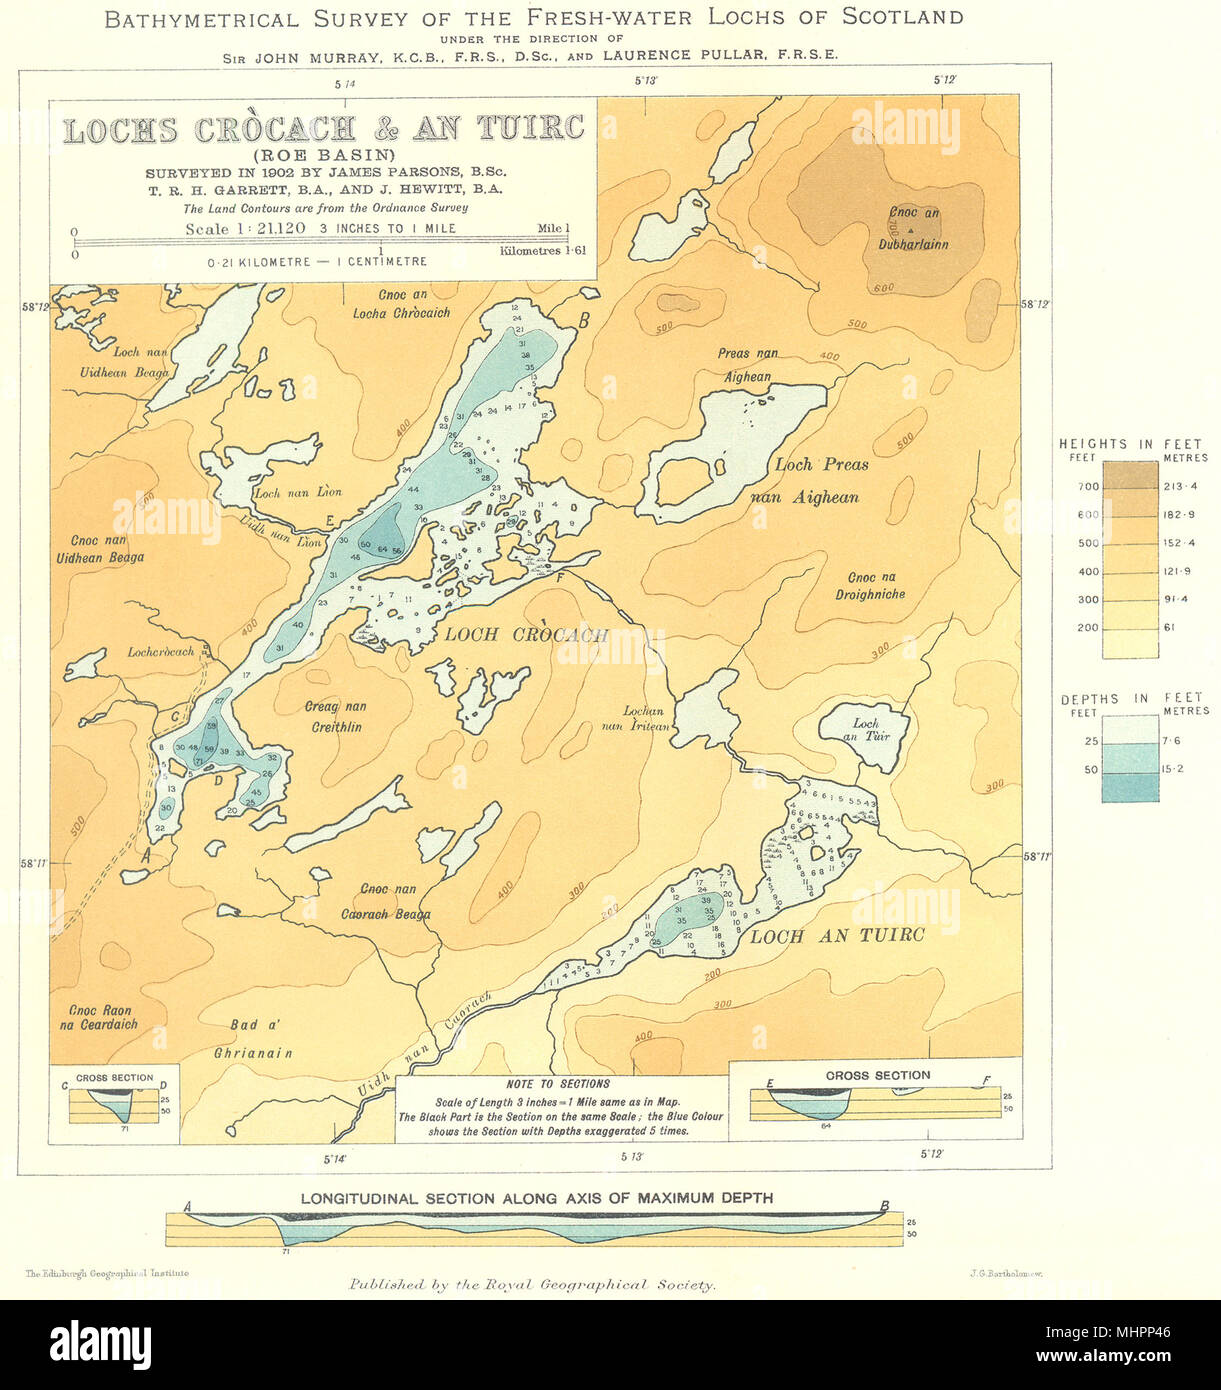 SCOTTISH LOCHS. Lochs Cròcach & An Tuirc (Roe Basin) . RGS 1904 old map Stock Photo